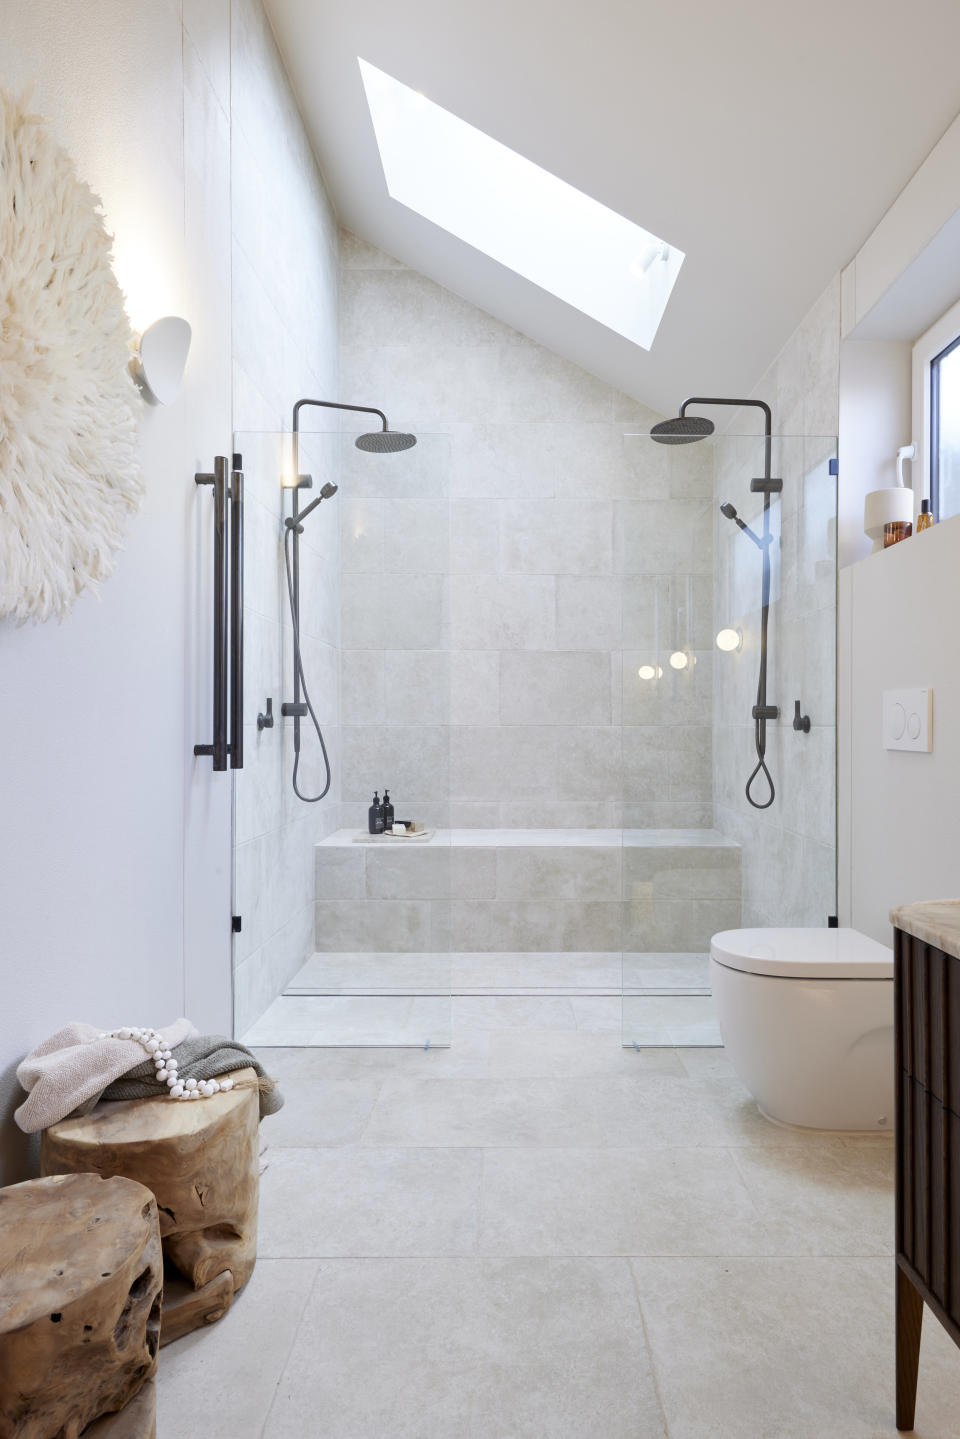 A shot of the double shower, with two wooden seats on the bottom left. 